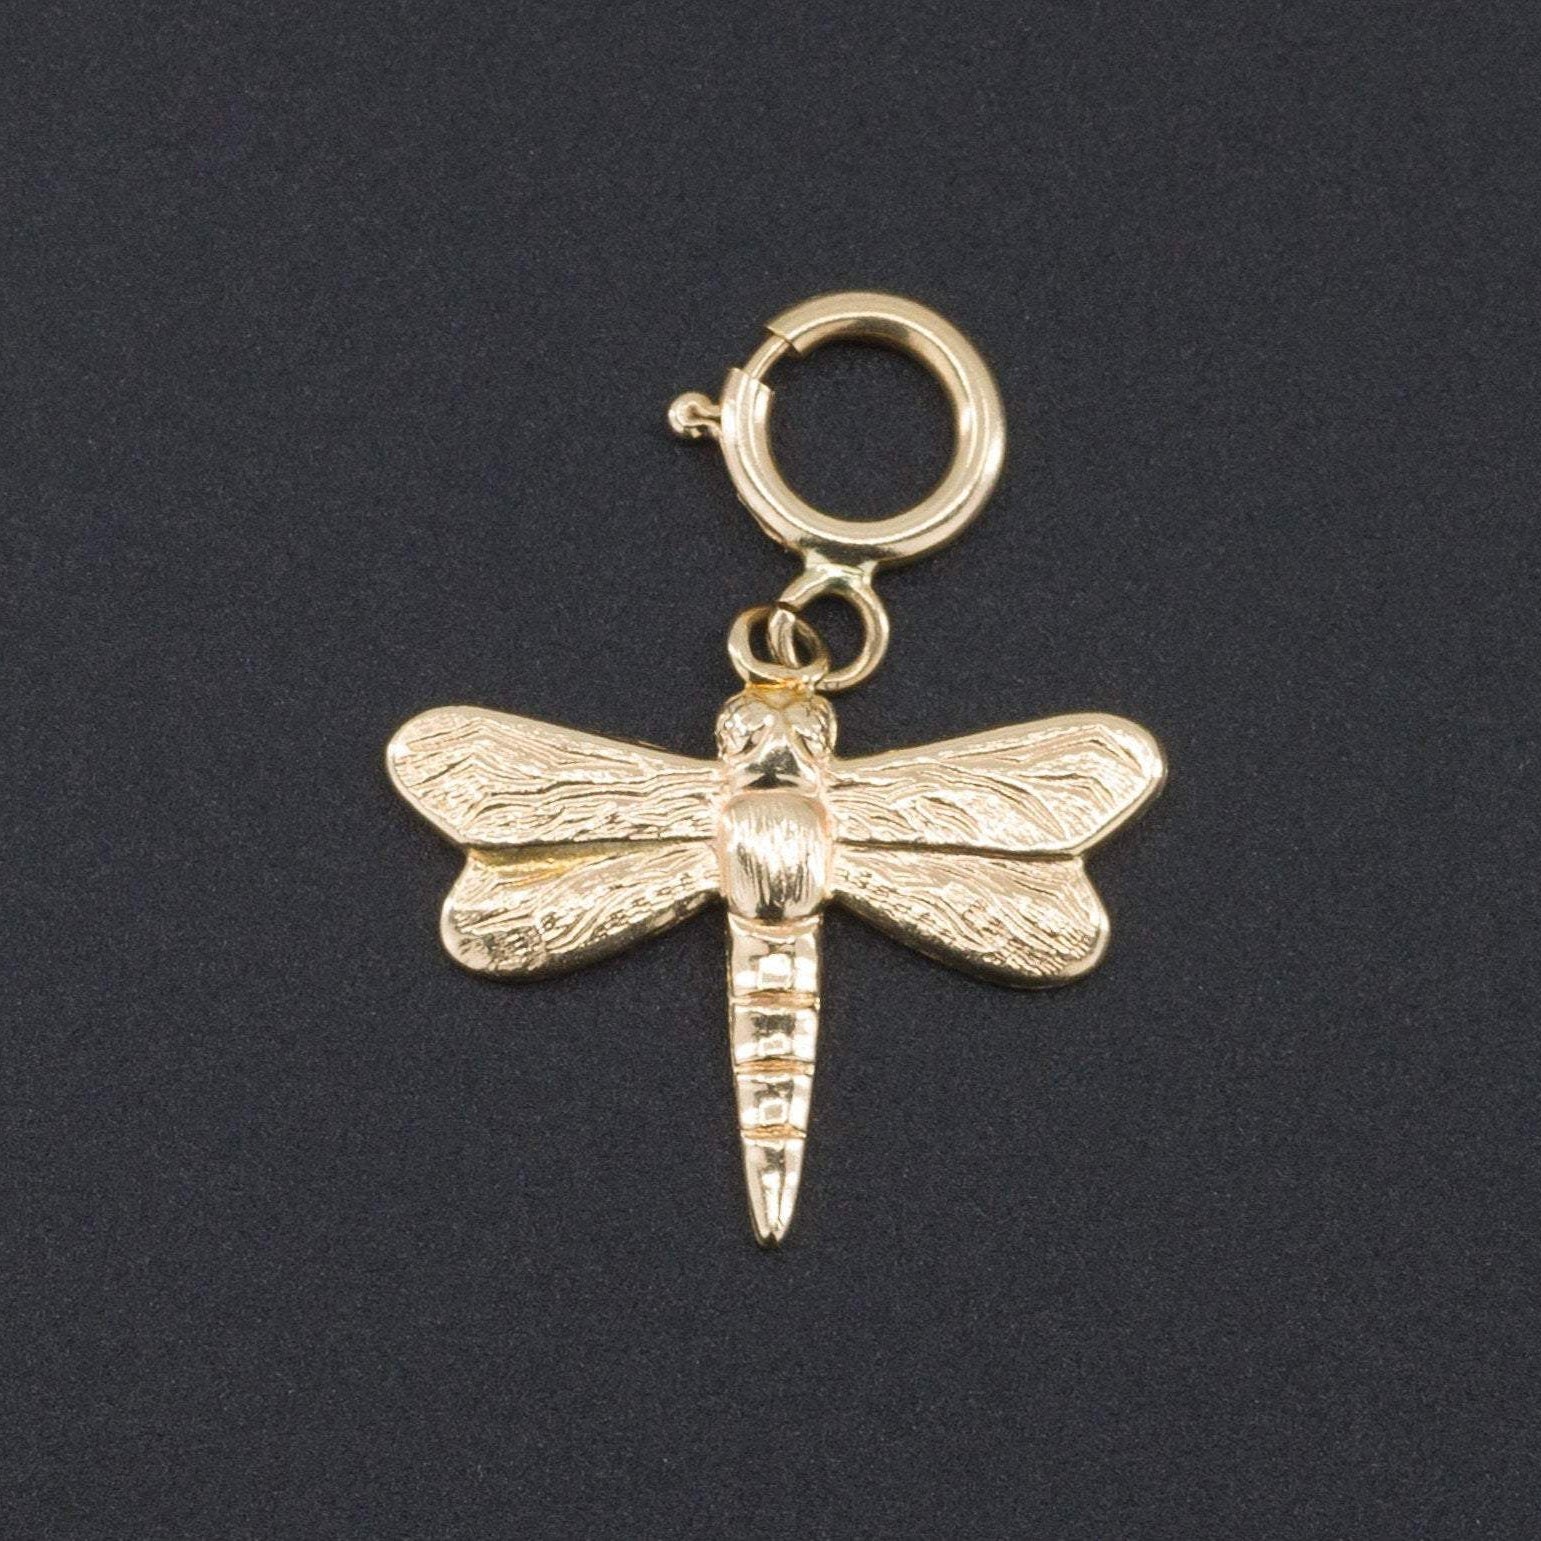 14k Gold Dragonfly Charm | Dragonfly Charm | Vintage Dragonfly Charm or Pendant